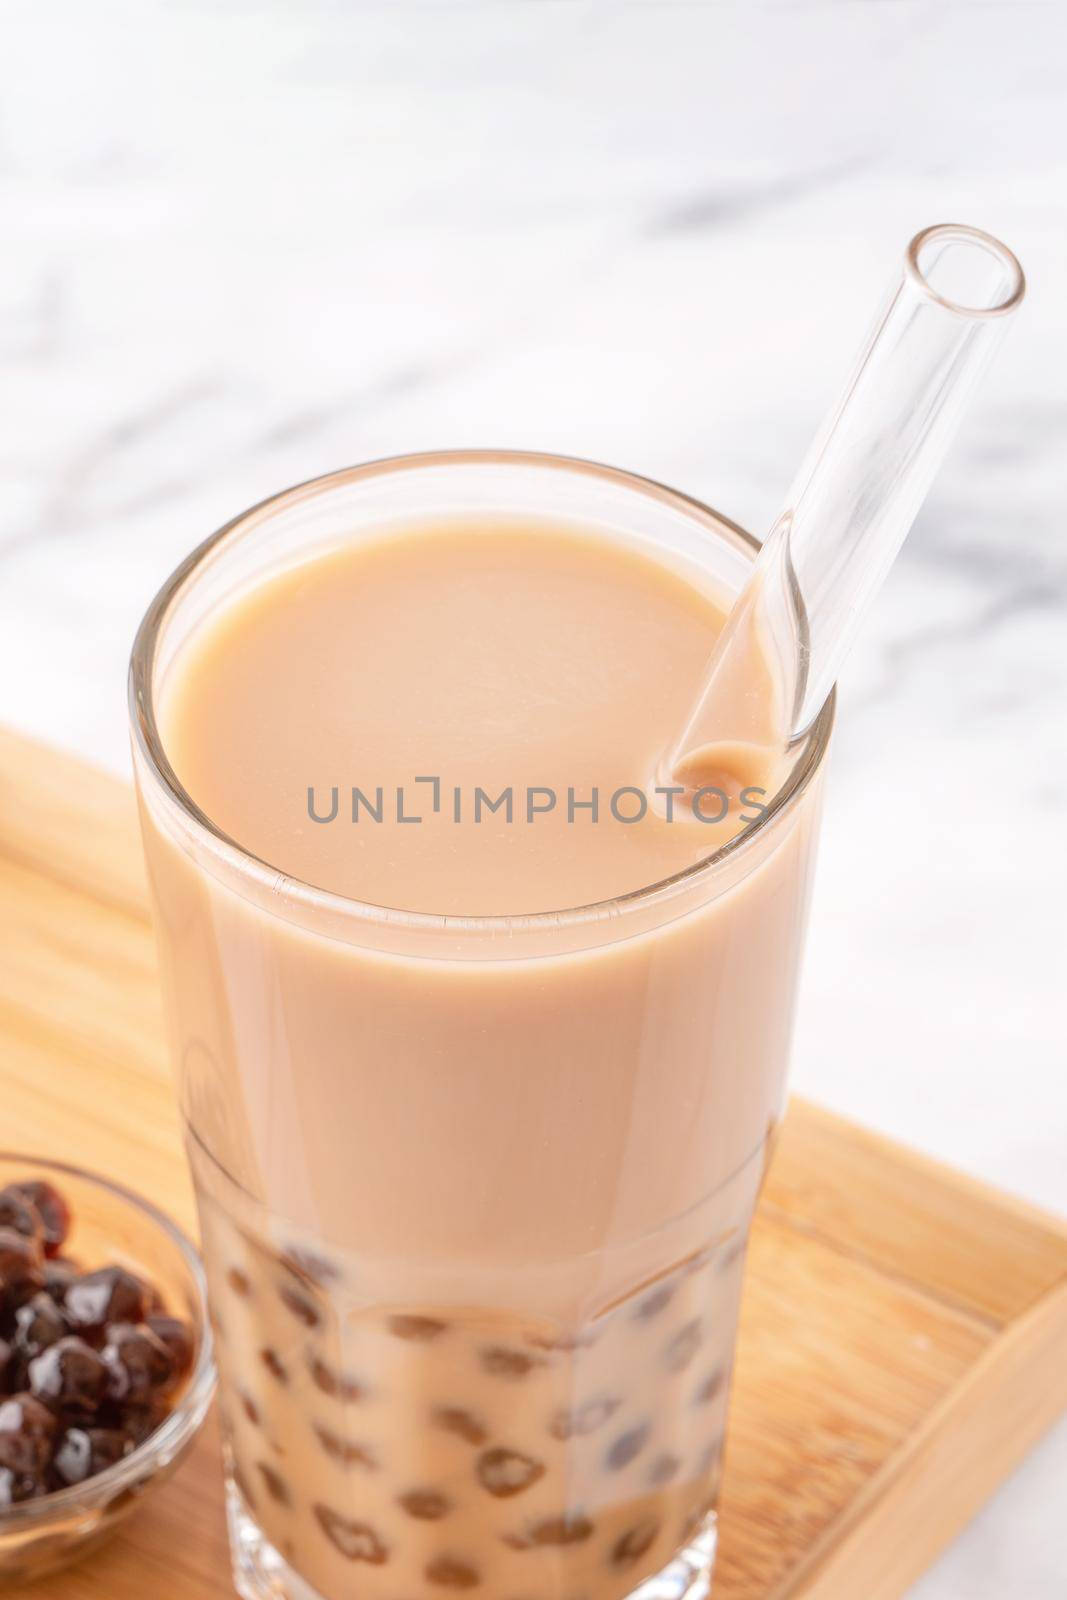 Tapioca pearl ball bubble milk tea, popular Taiwan drink, in drinking glass with straw on marble white table and wooden tray, close up, copy space. by ROMIXIMAGE